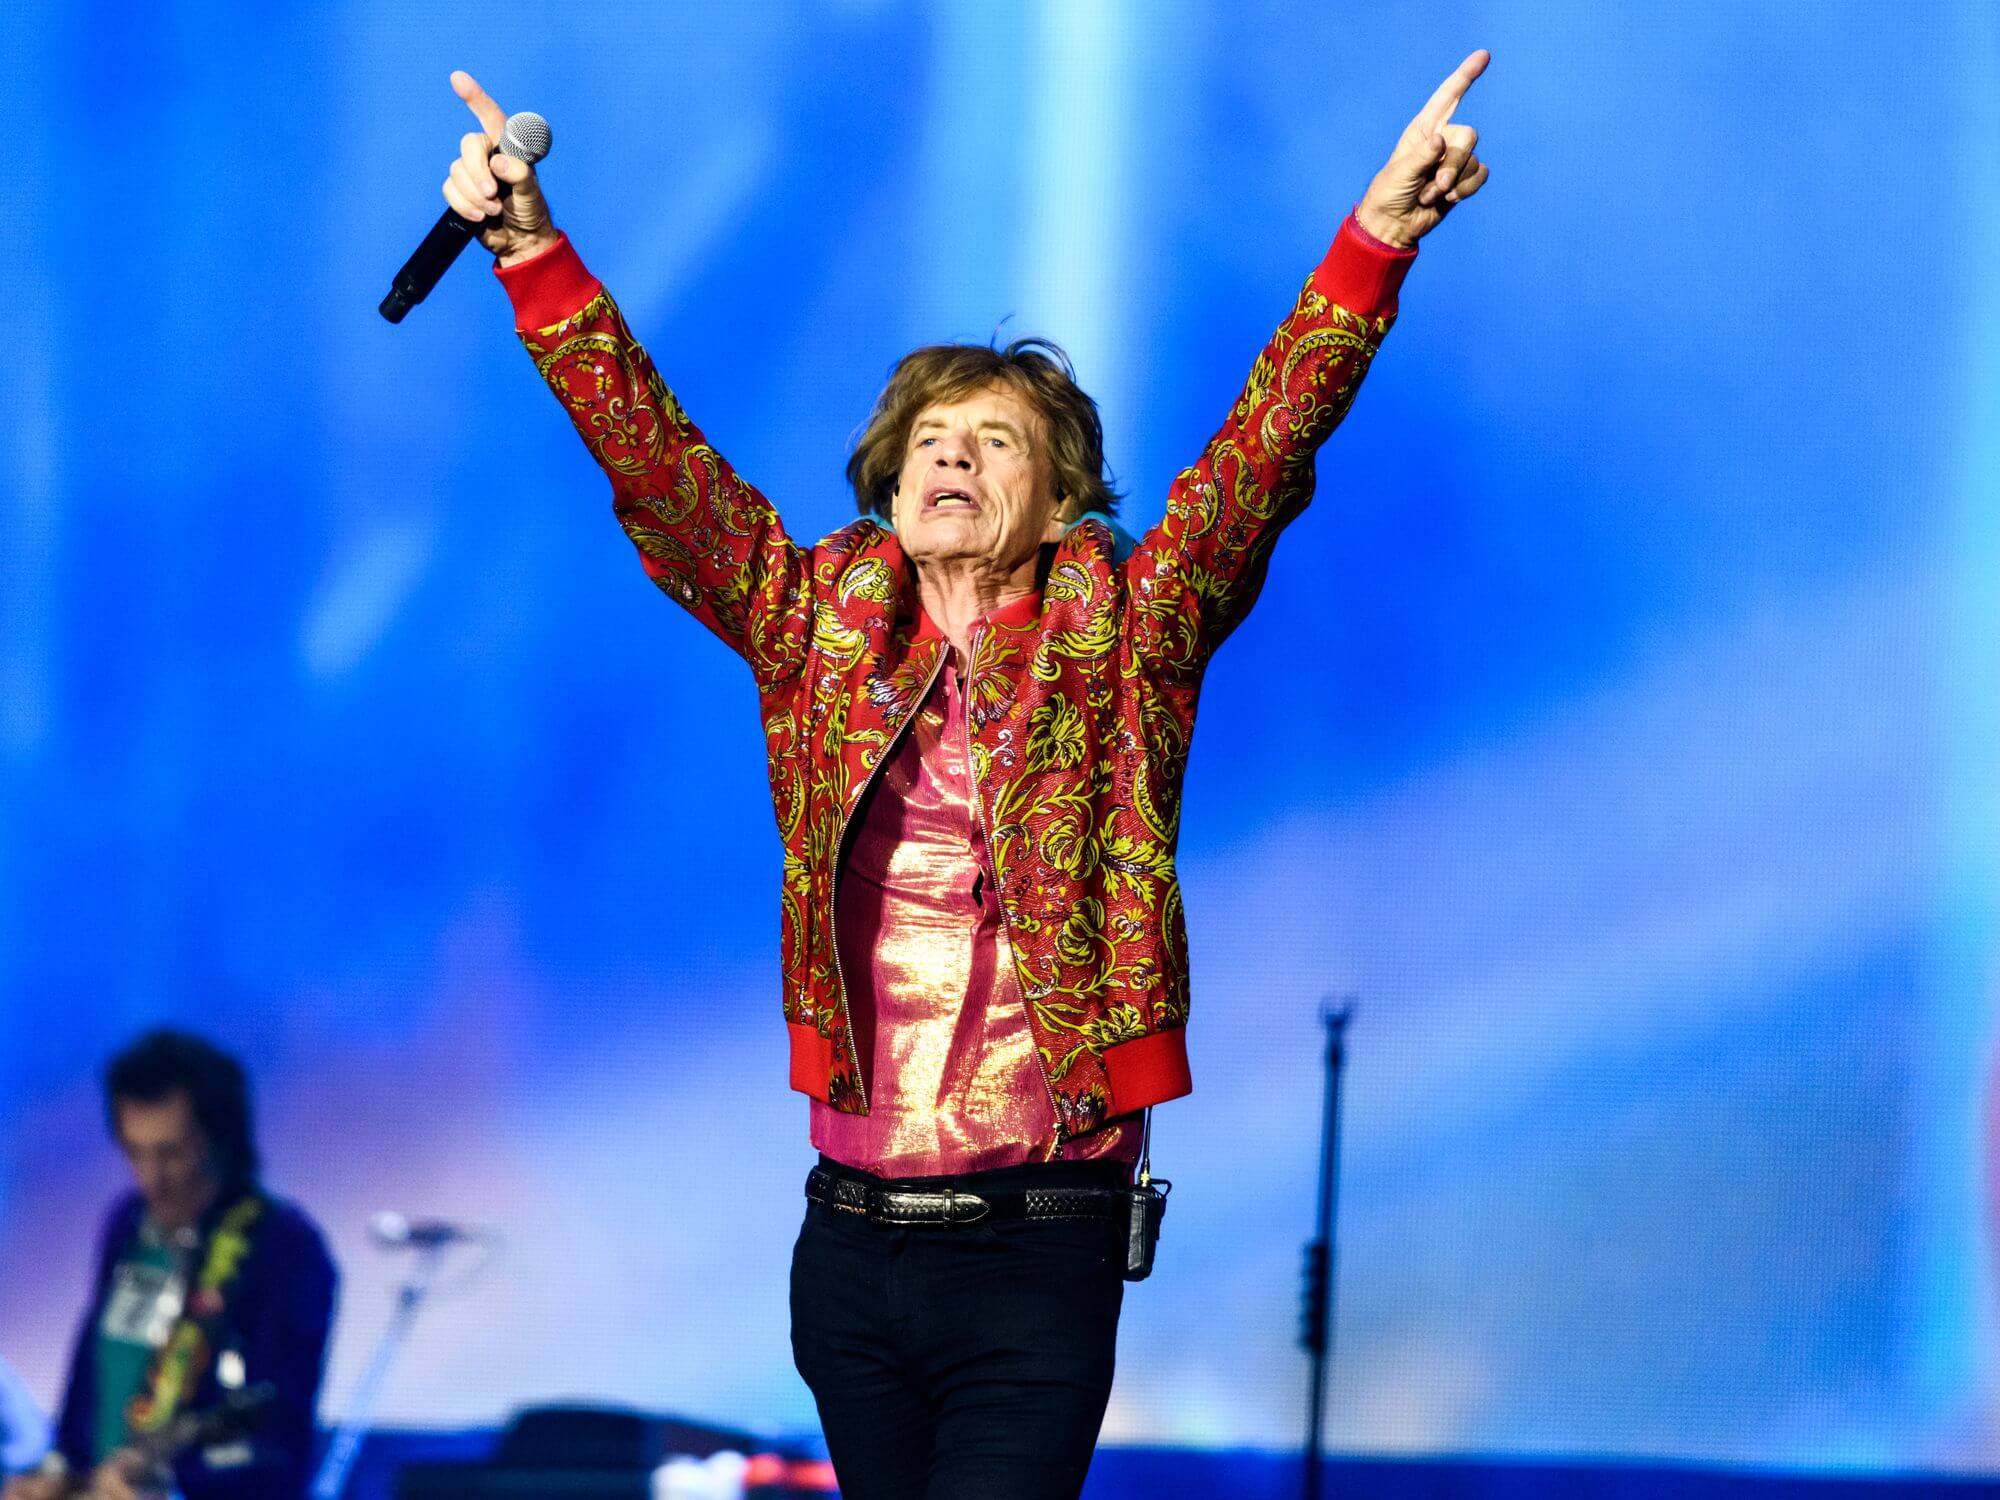 Mick Jagger of The Rolling Stones